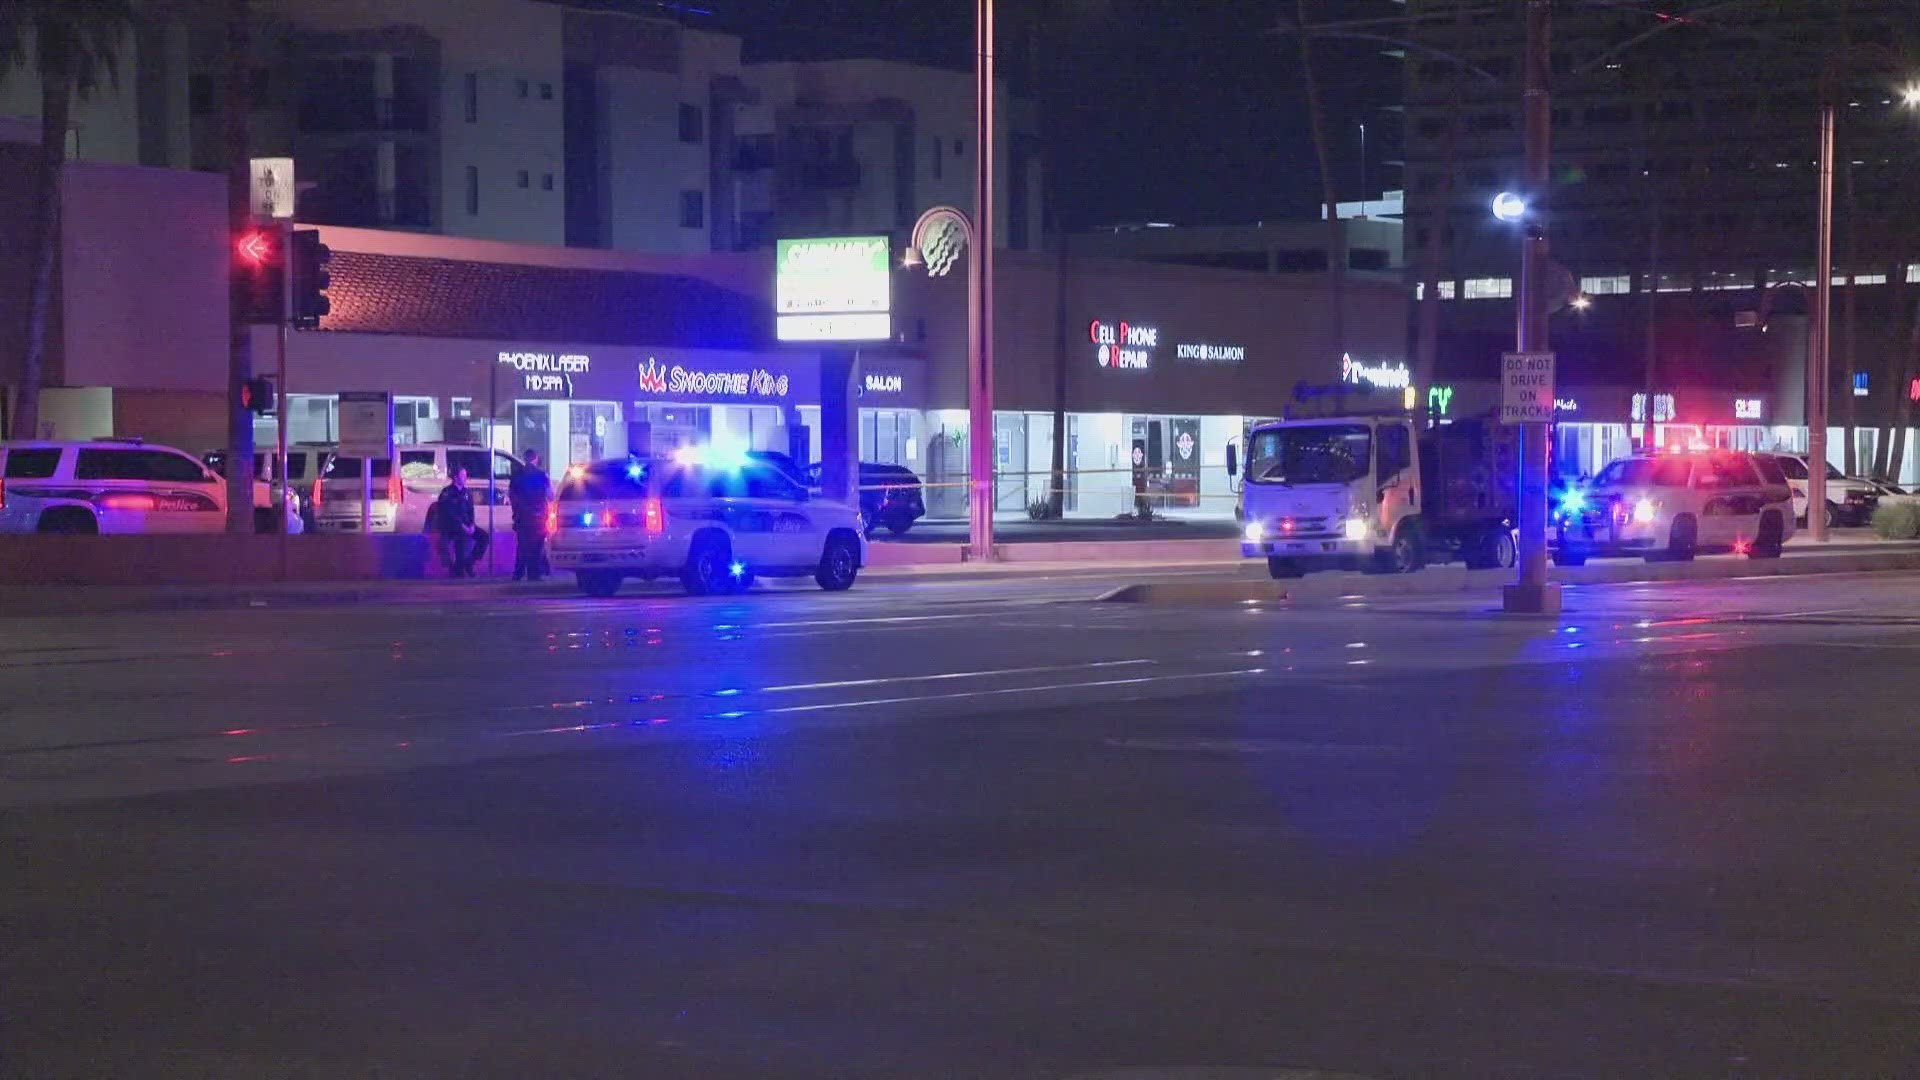 The Phoenix Police Department said the incident happened Sunday night when officers were flagged down to the intersection for unknown reasons.